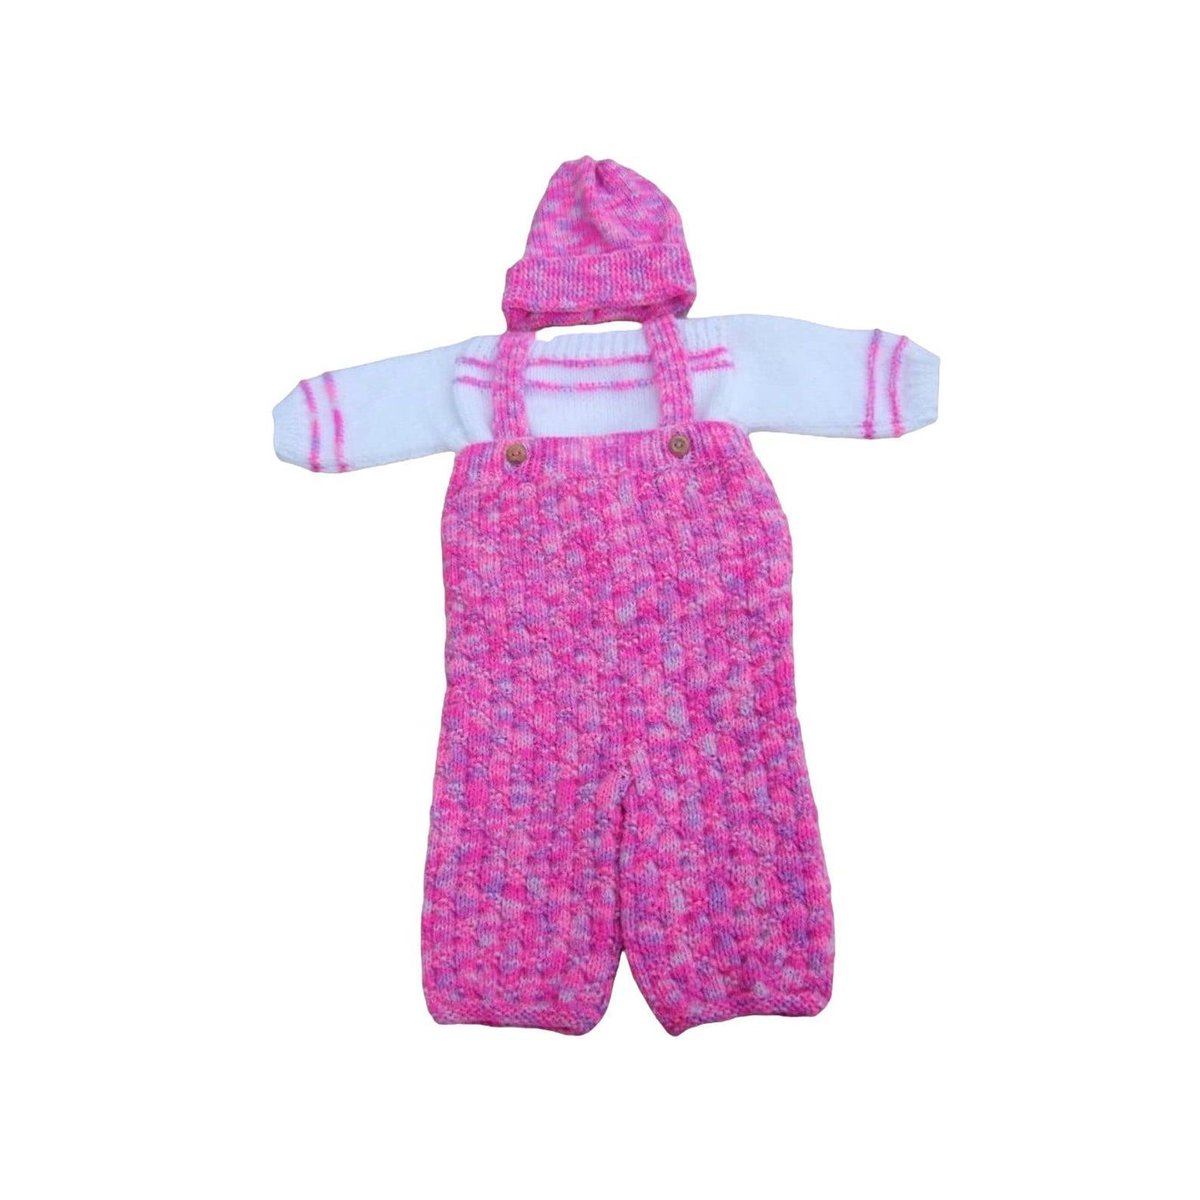 Discover this lovely hand knitted baby girl set! Including a jumper, dungarees and a hat, it's perfect for 0-3 months. Shop now on #Etsy: knittingtopia.etsy.com/listing/170794… #Handmade #BabyFashion #knittingtopia #MHHSBD #craftbizparty #babyessentials